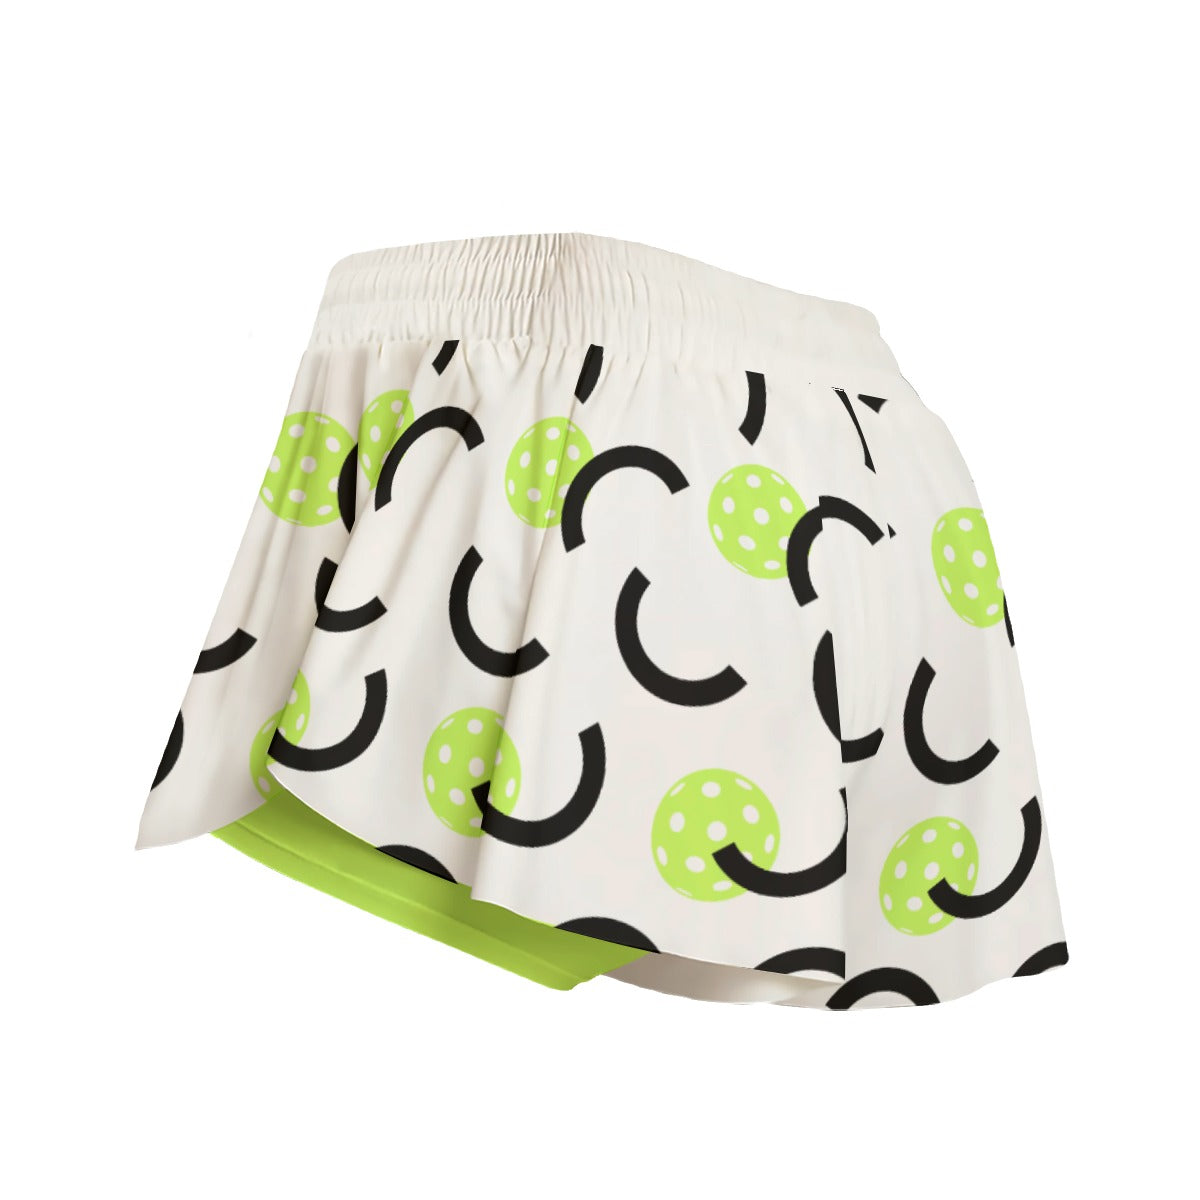 Dizzy Pickle Believe Pickleball Women's Sport Culottes Skorts with Inner Shorts and Pockets White